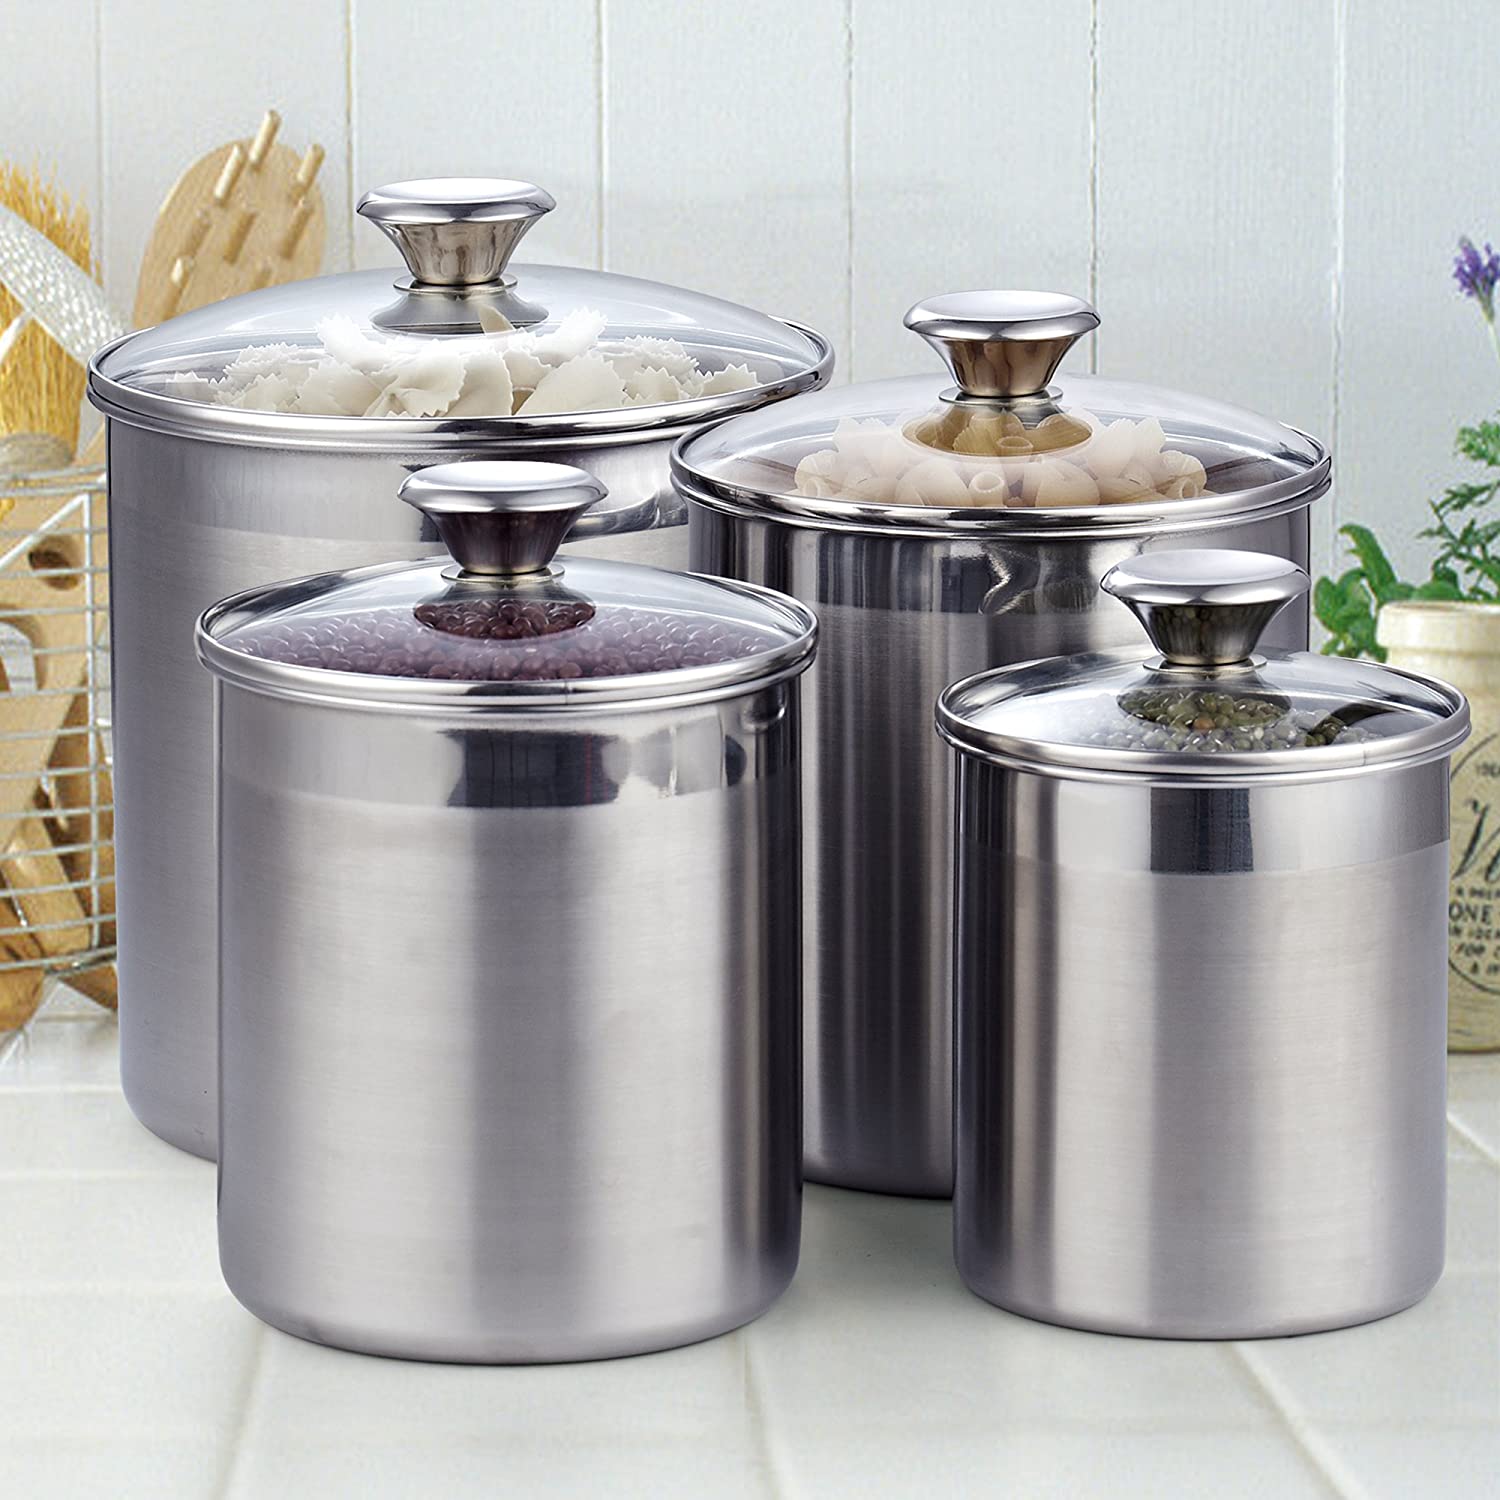 Food jars and kitchen canisters